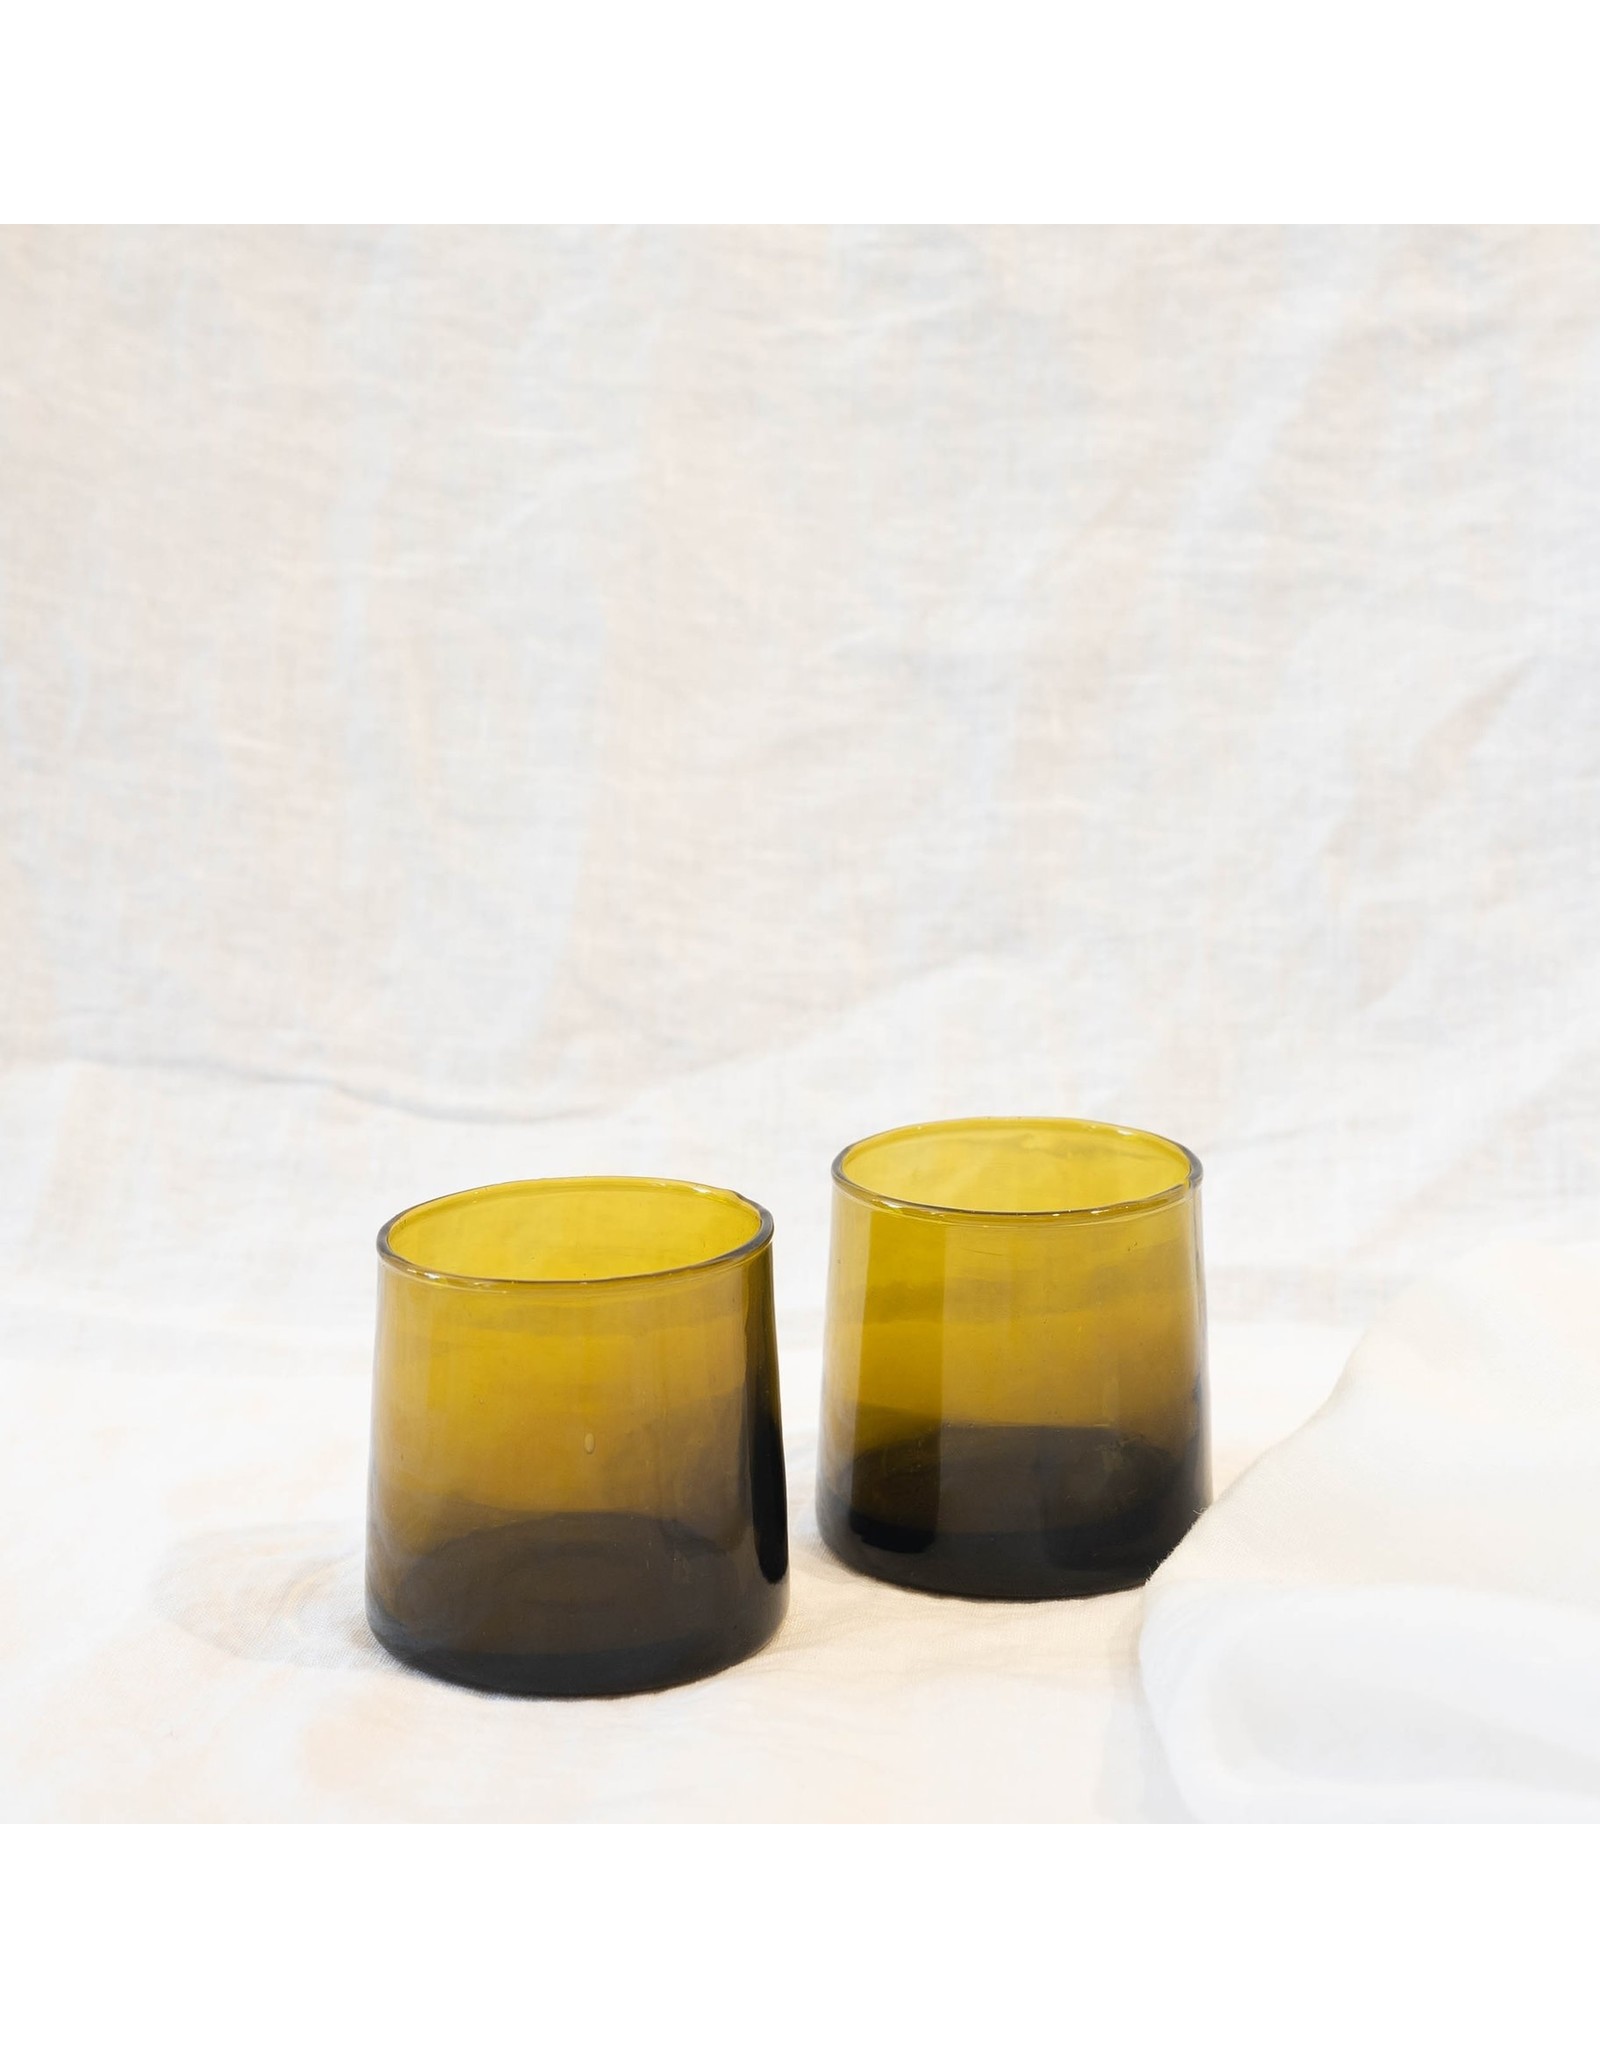 Socco Designs Handblown Recycled Glass Tumblers, Morocco